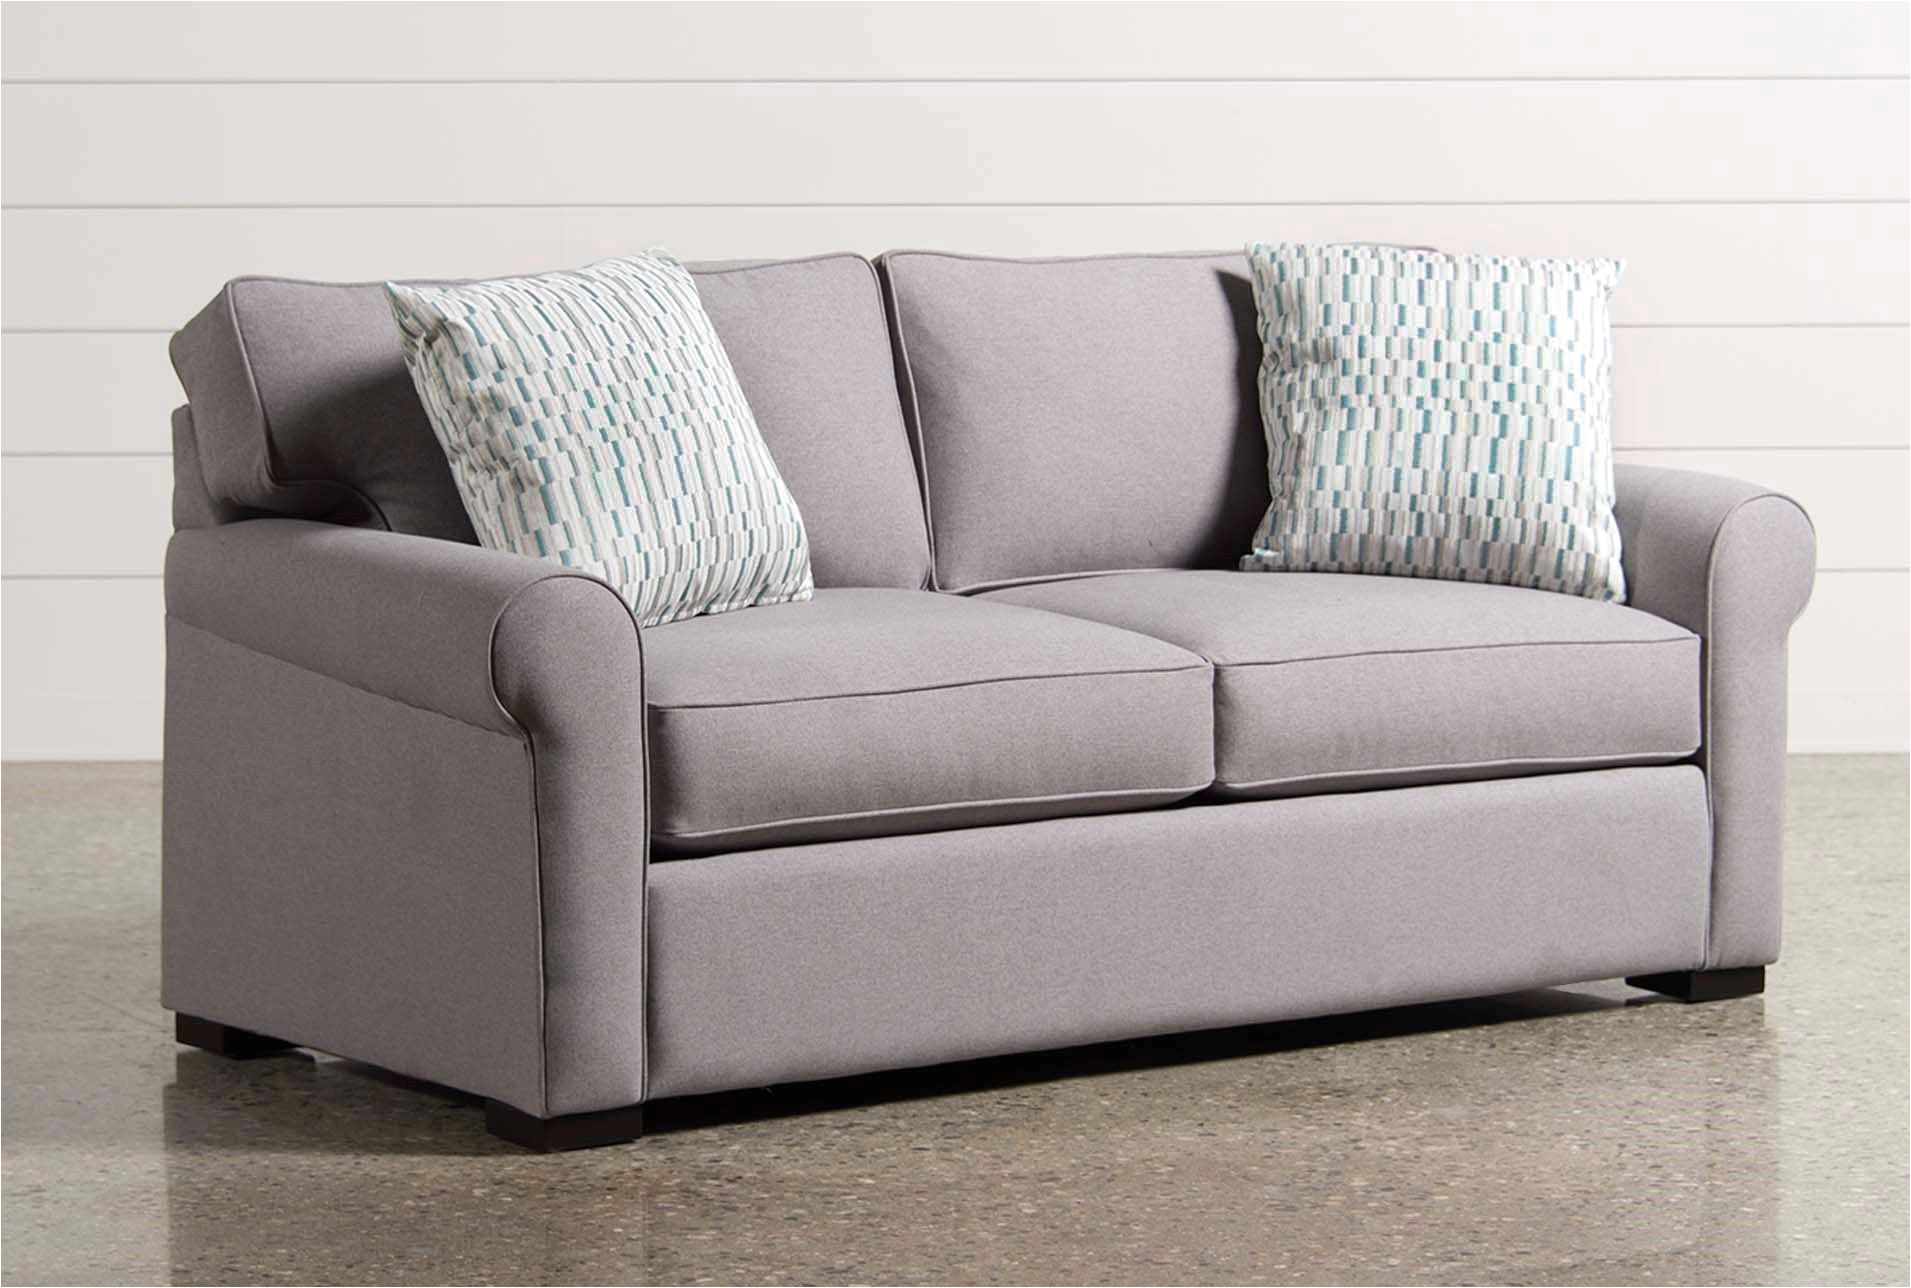 51 pictures of 51 beautiful 72 inch sleeper sofa images july 2018